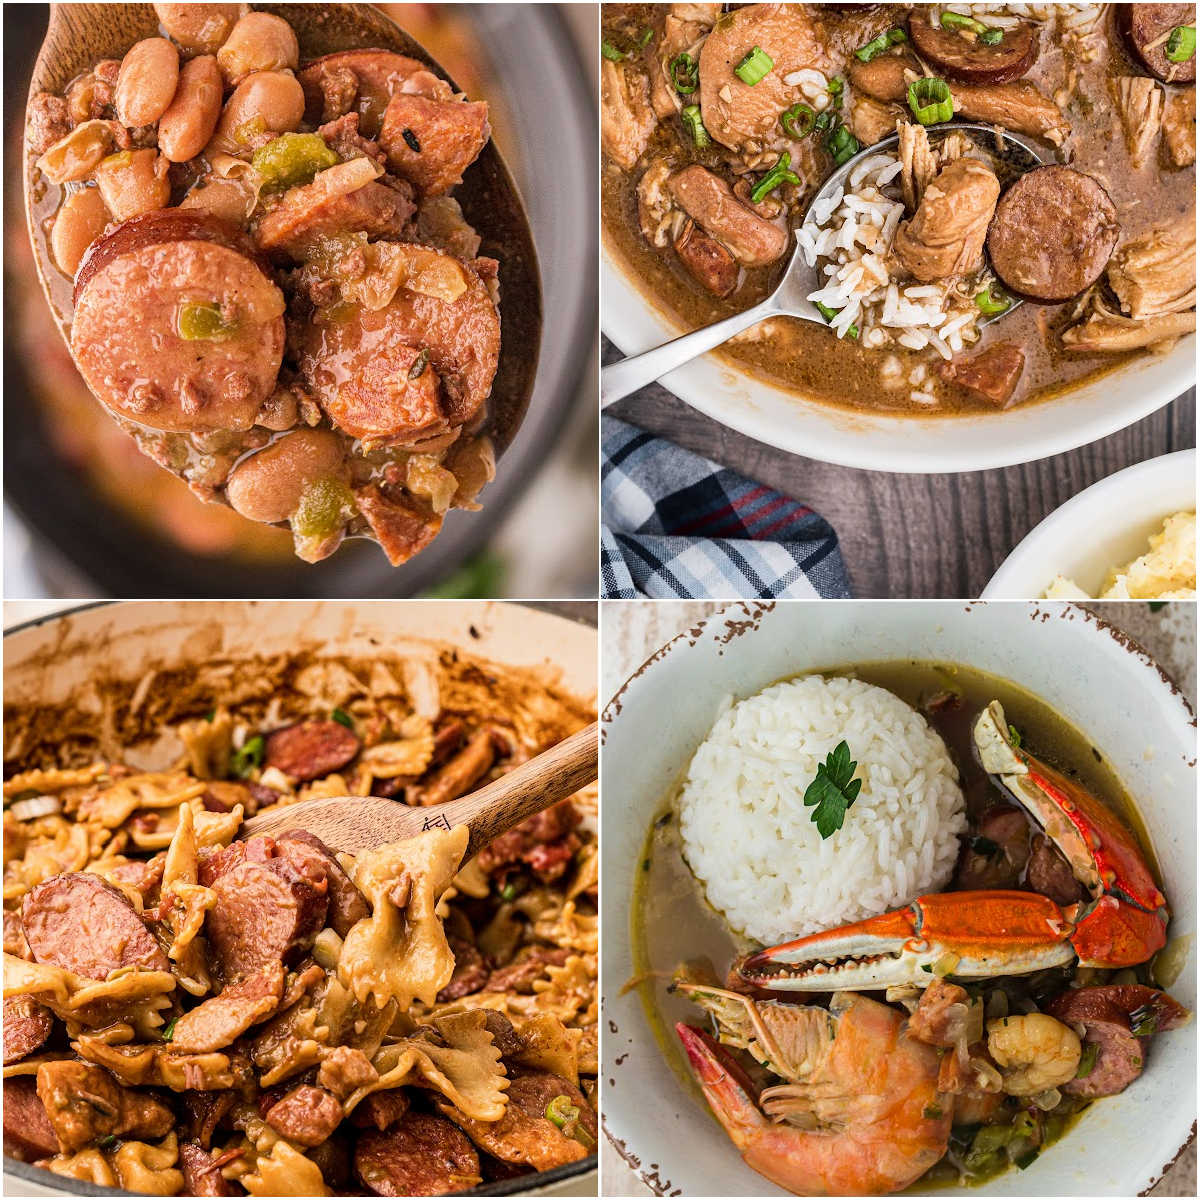 A collage of four images showing different dishes with smoked sausage.